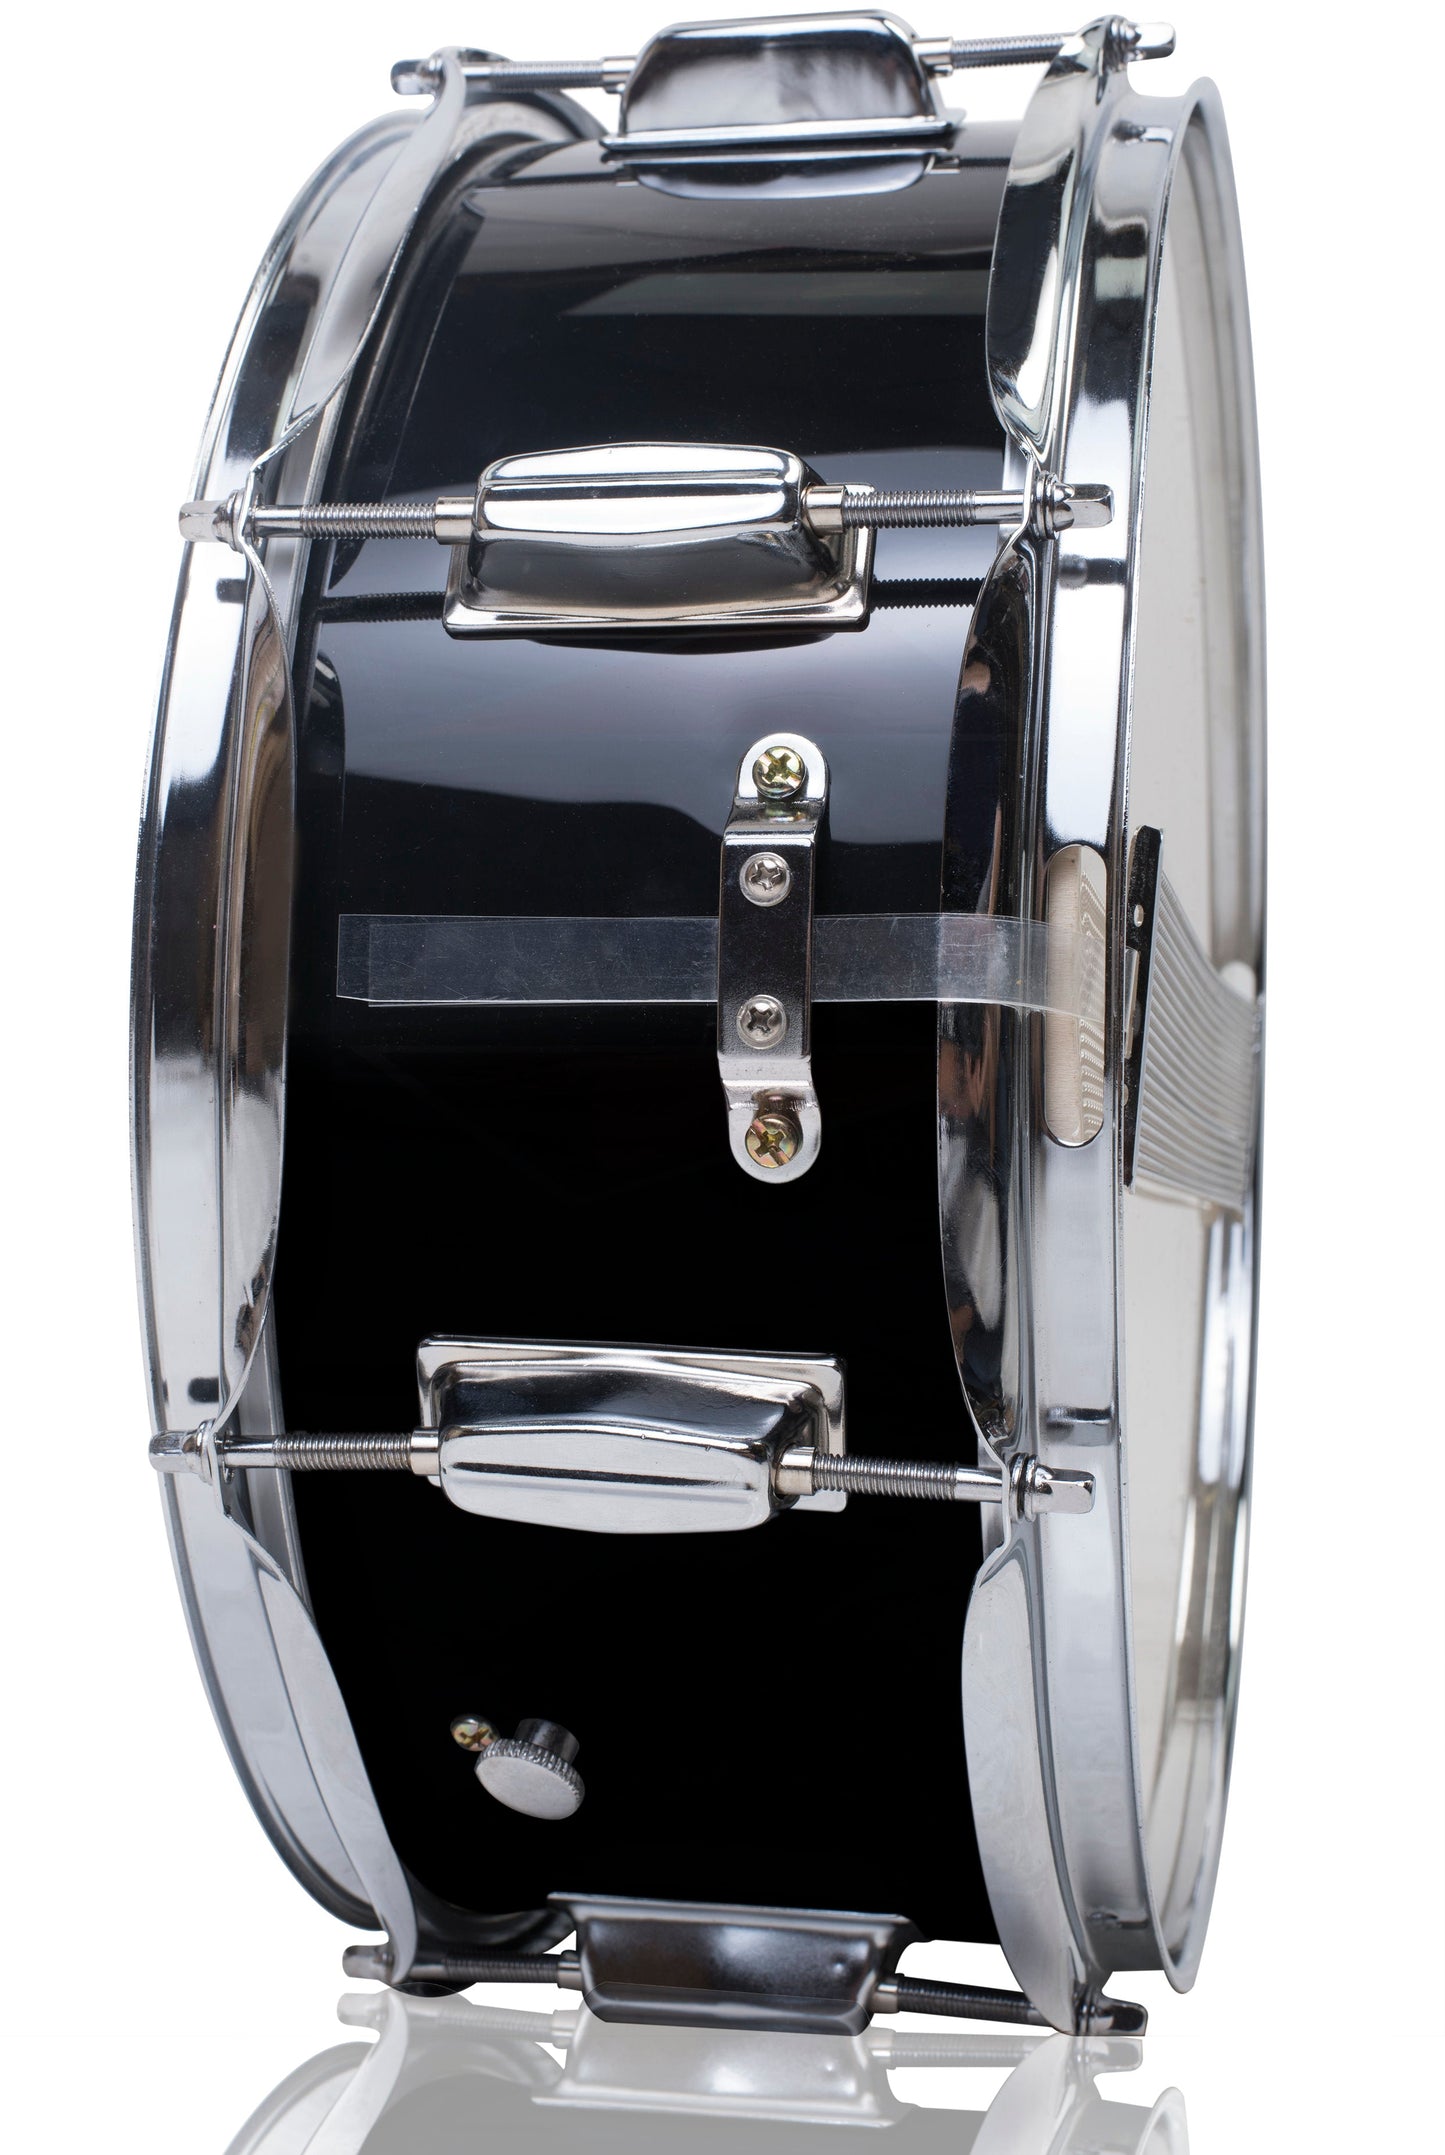 GRIFFIN Snare Drum - Poplar Wood Shell 14" x 5.5" with Black PVC & Coated Head - Acoustic Marching Percussion Musical Instrument Set with Drummers Key